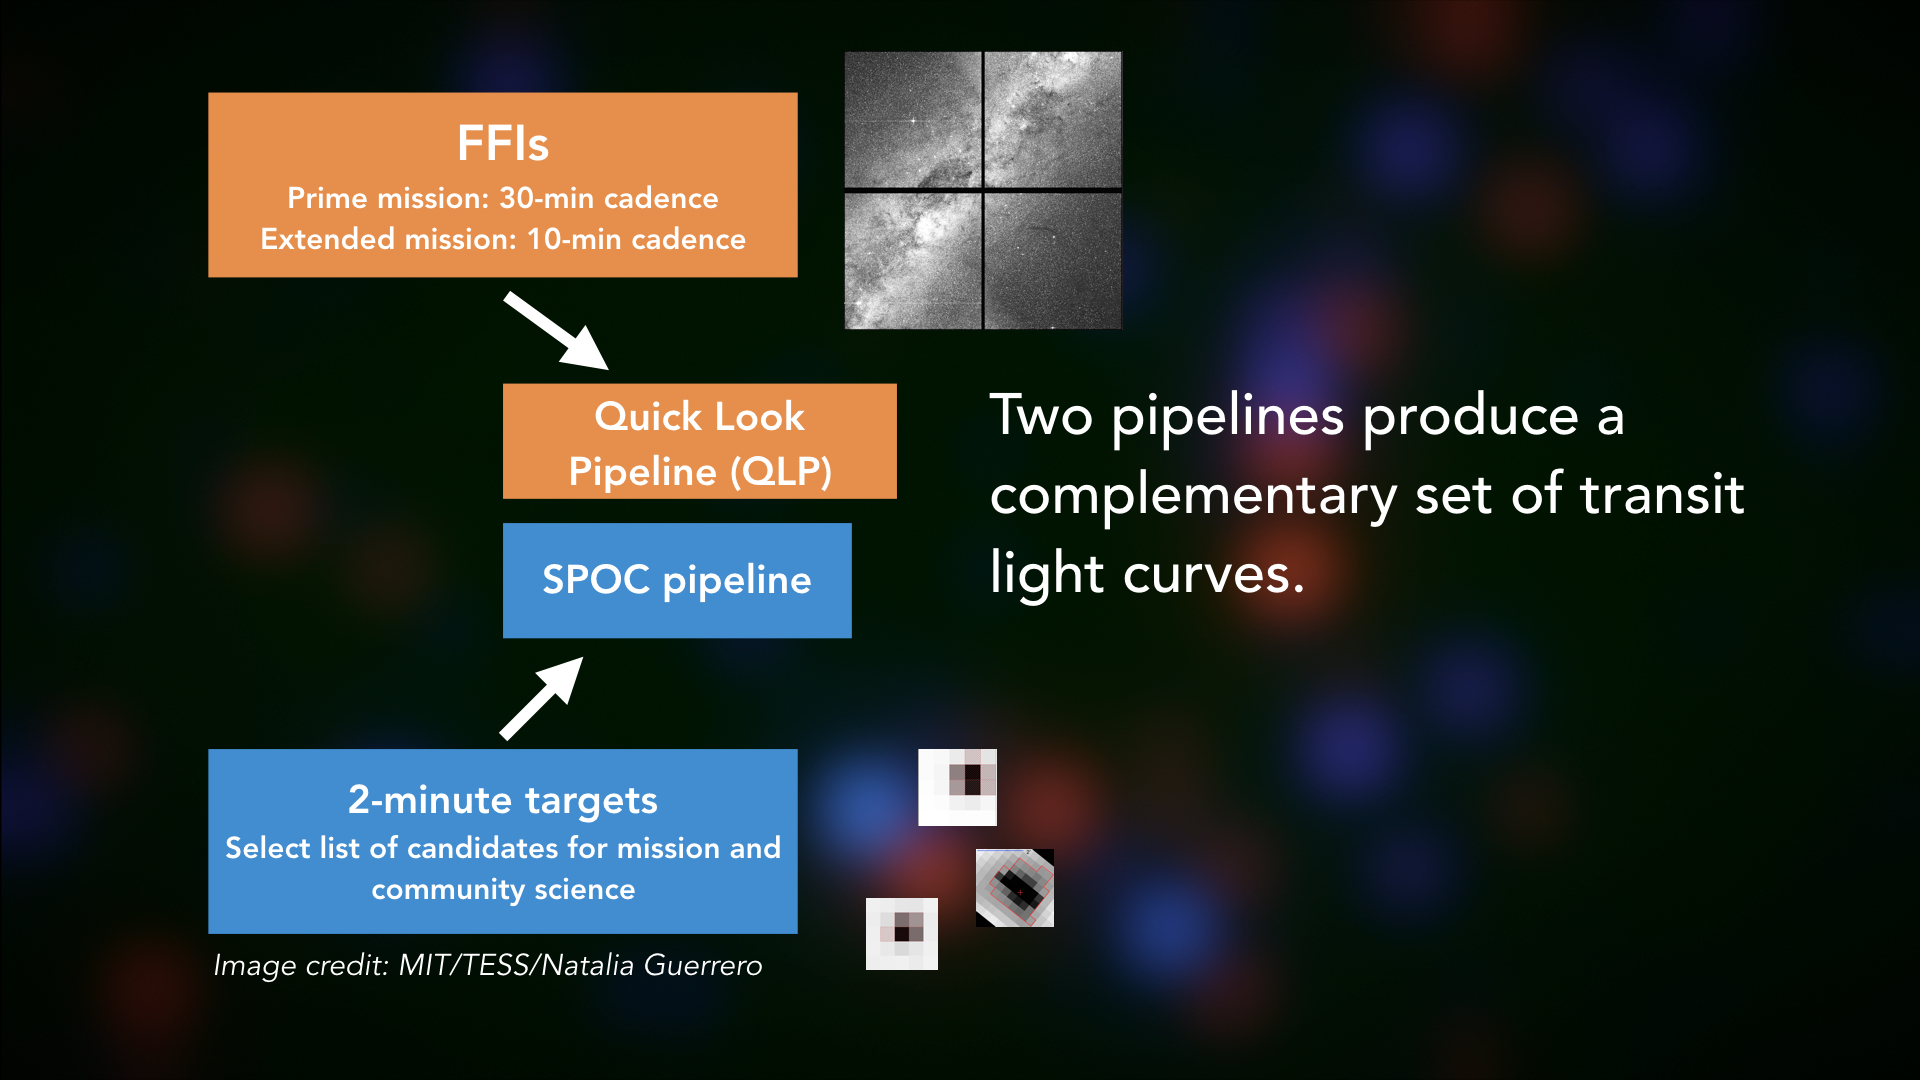 The full frame image quick look pipeline and spoc 2-minte cadence pipeline produce a complementary set of transit light curves.